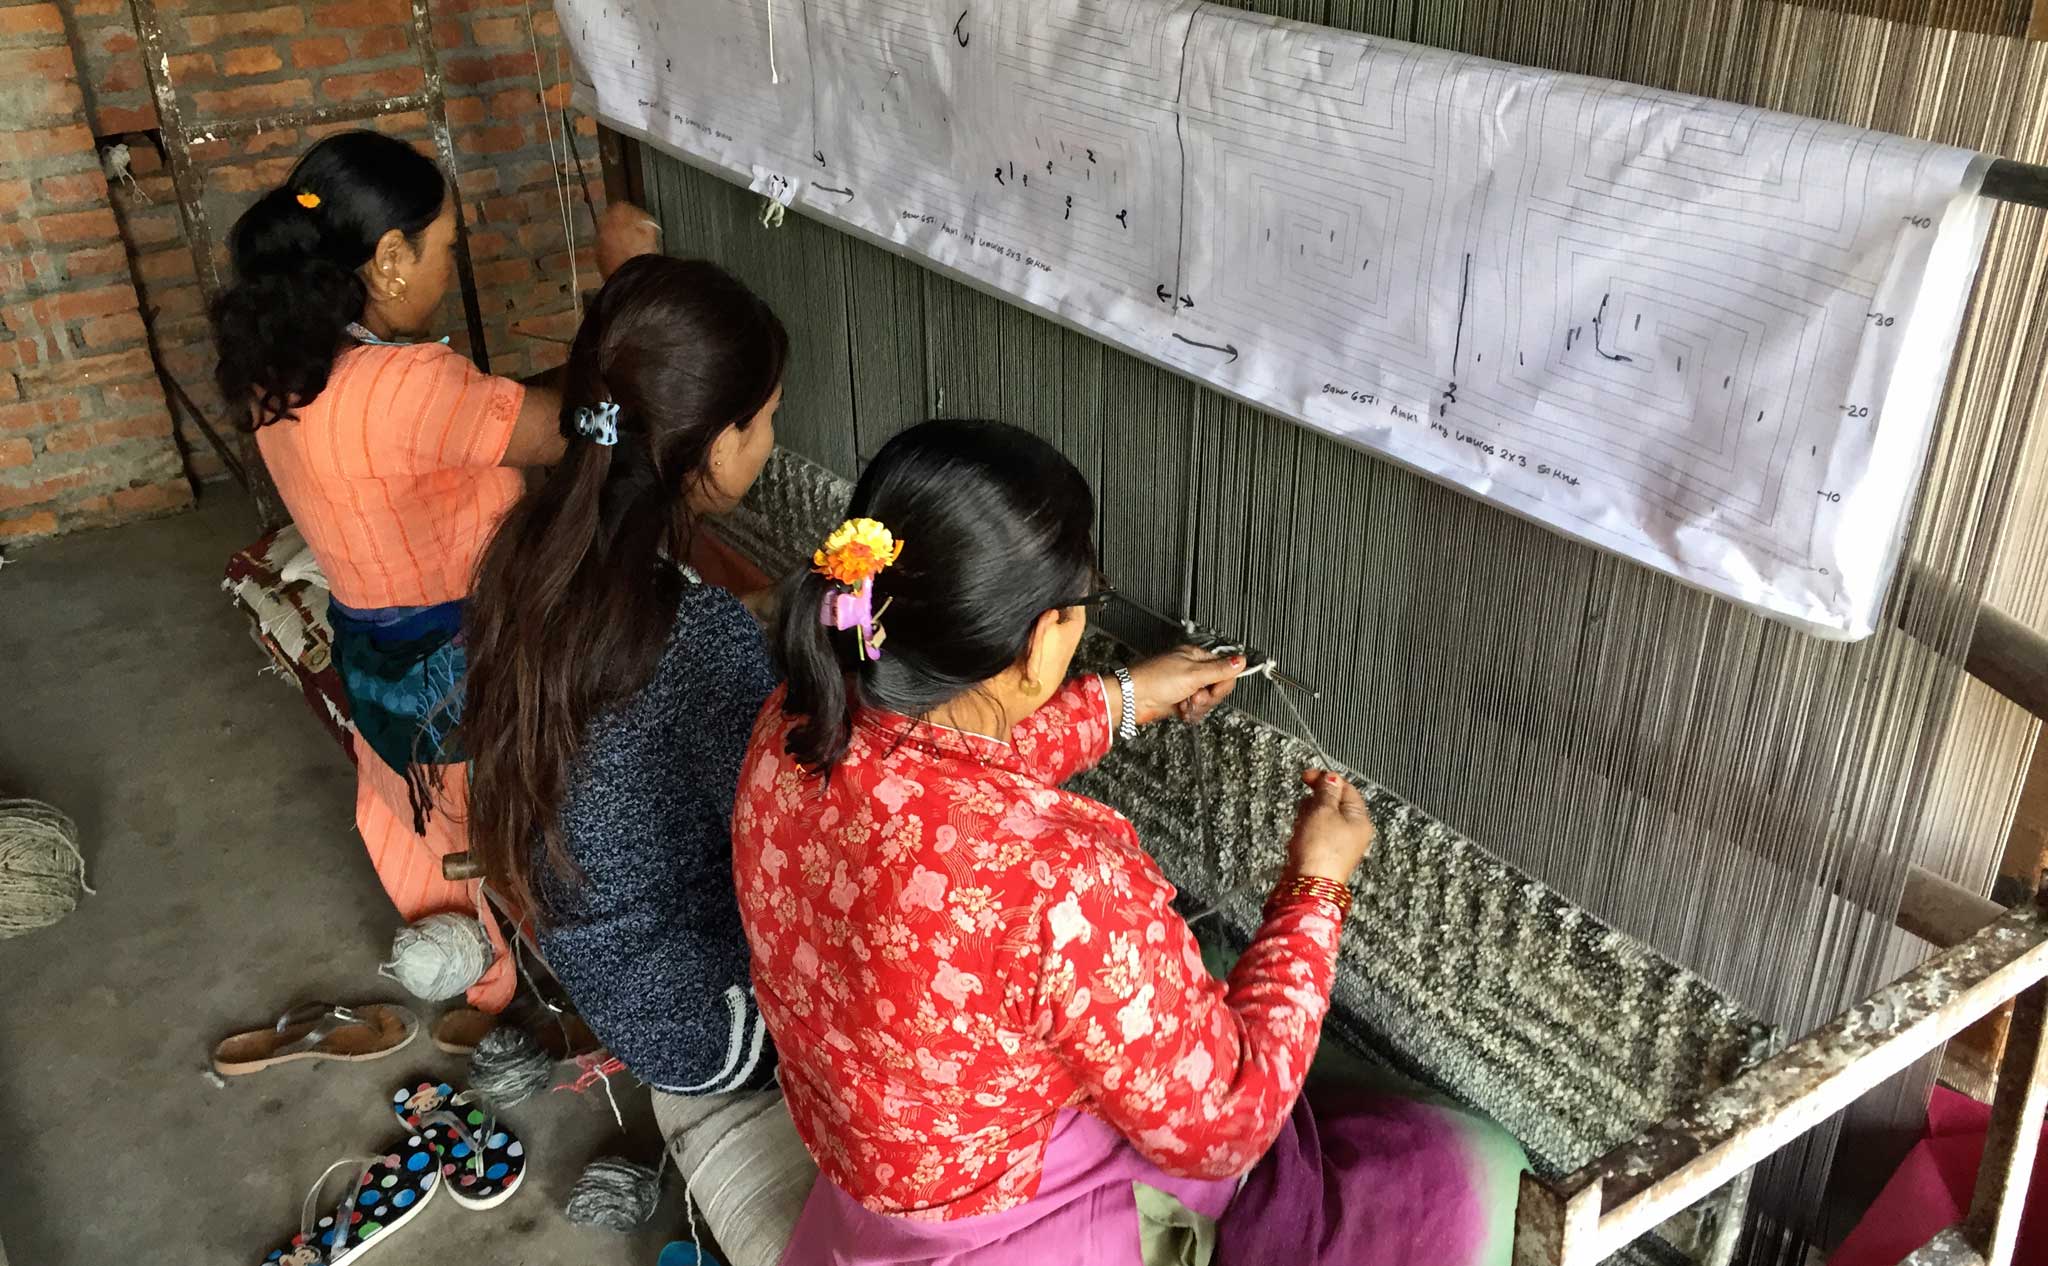 In addition to operating the most rigorous inspection regime to certify no illegal child or bonded labour was used in the manufacture of a handmade rug, GoodWeave now runs weaving training programs to teach job skills for those seeking a way out of poverty. | Image by The Ruggist.